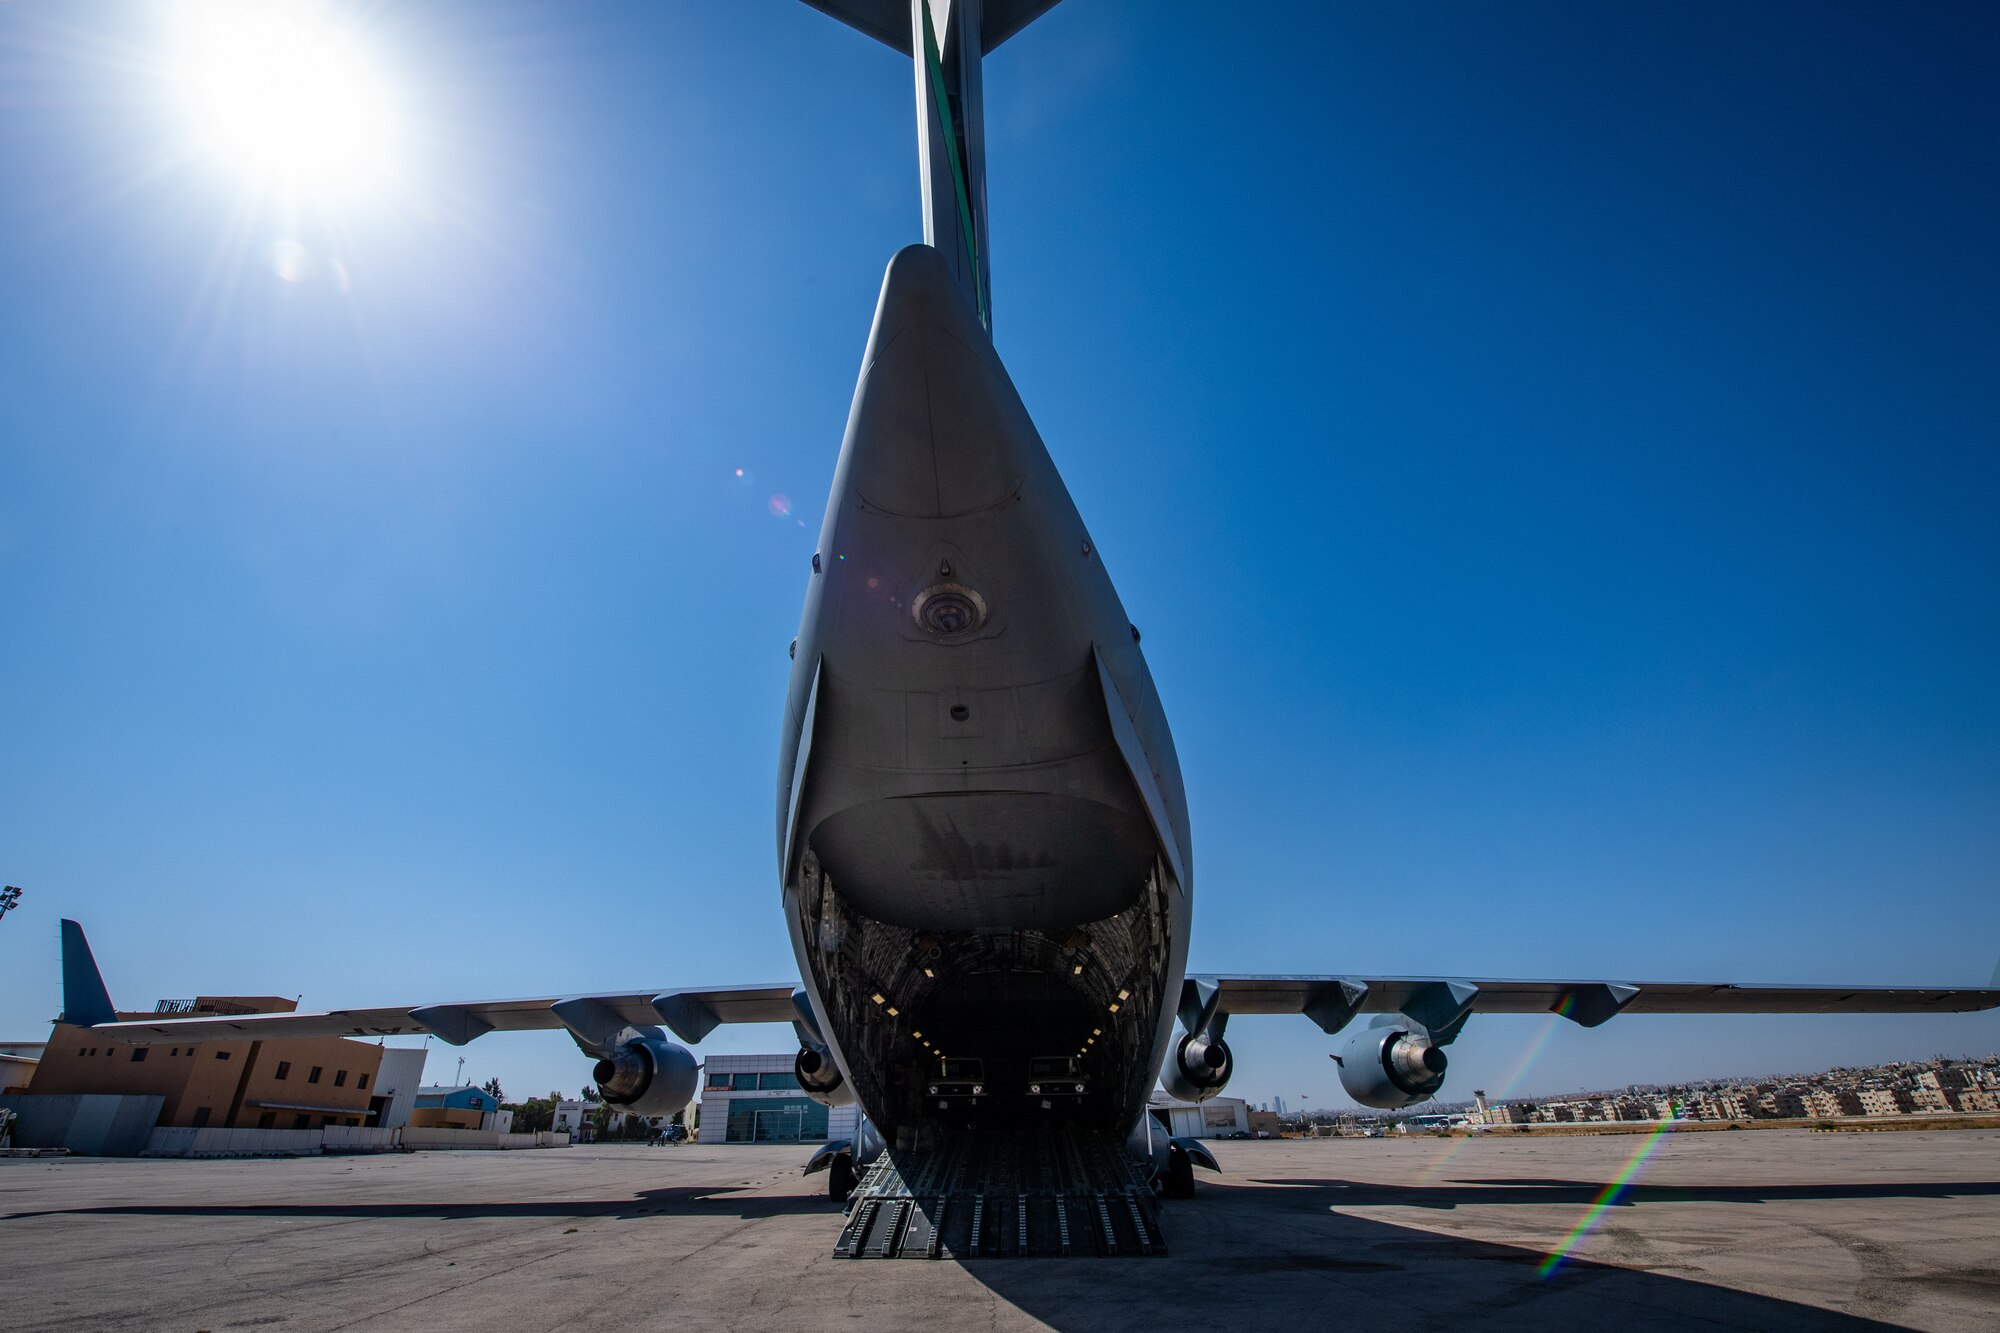 A U.S. Air Force C-17 Globemaster III awaits cargo off-load after landing in Jordan, Oct. 14, 2019. The port provides aerial logistics for the American Embassy to Jordan through the Military Assistance Program, handling cargo and passenger movement in support of State Department efforts.